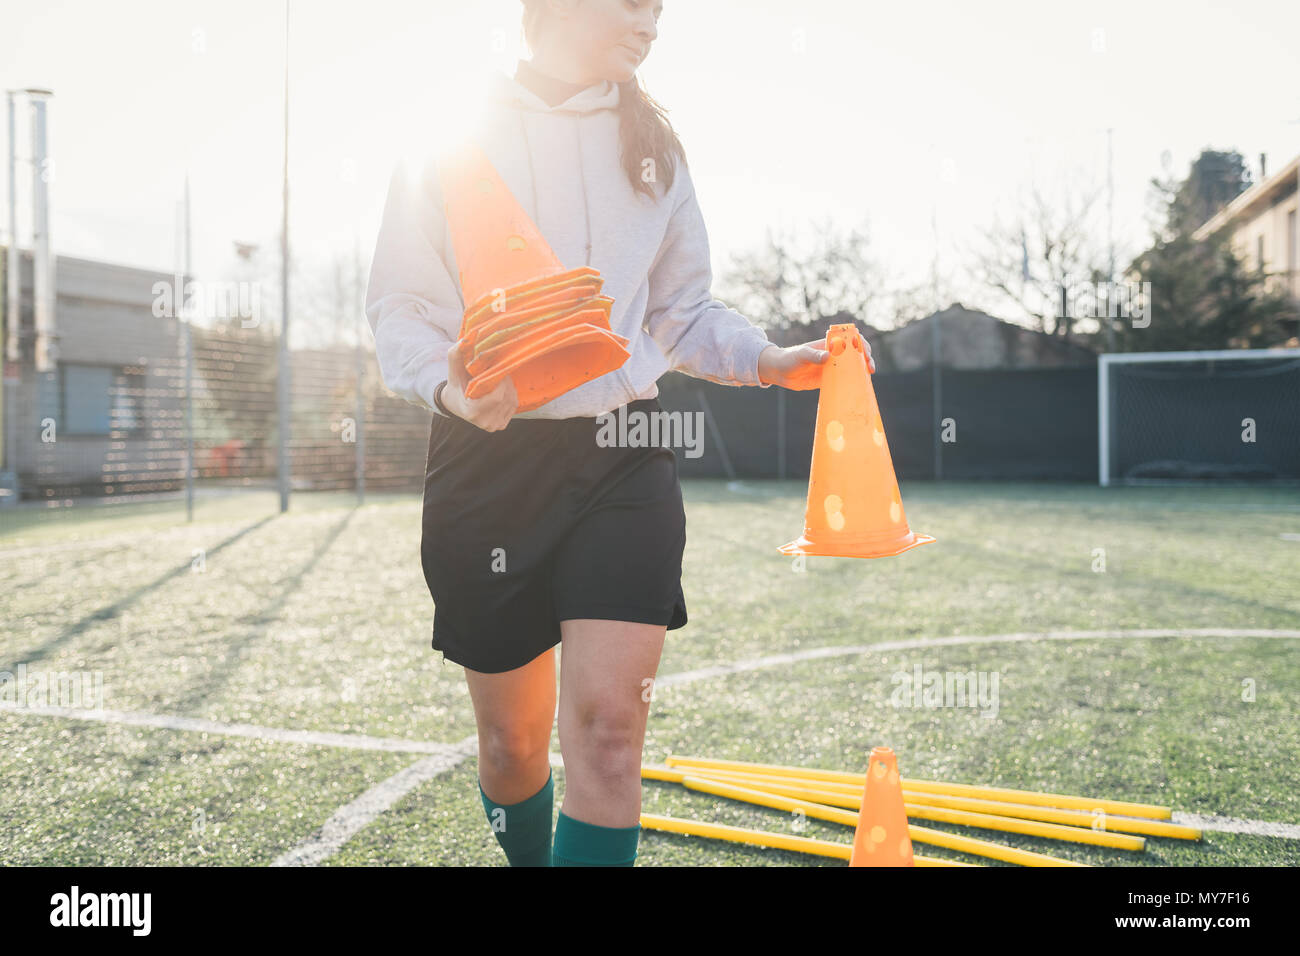 Football player preparing pitch for practice Stock Photo